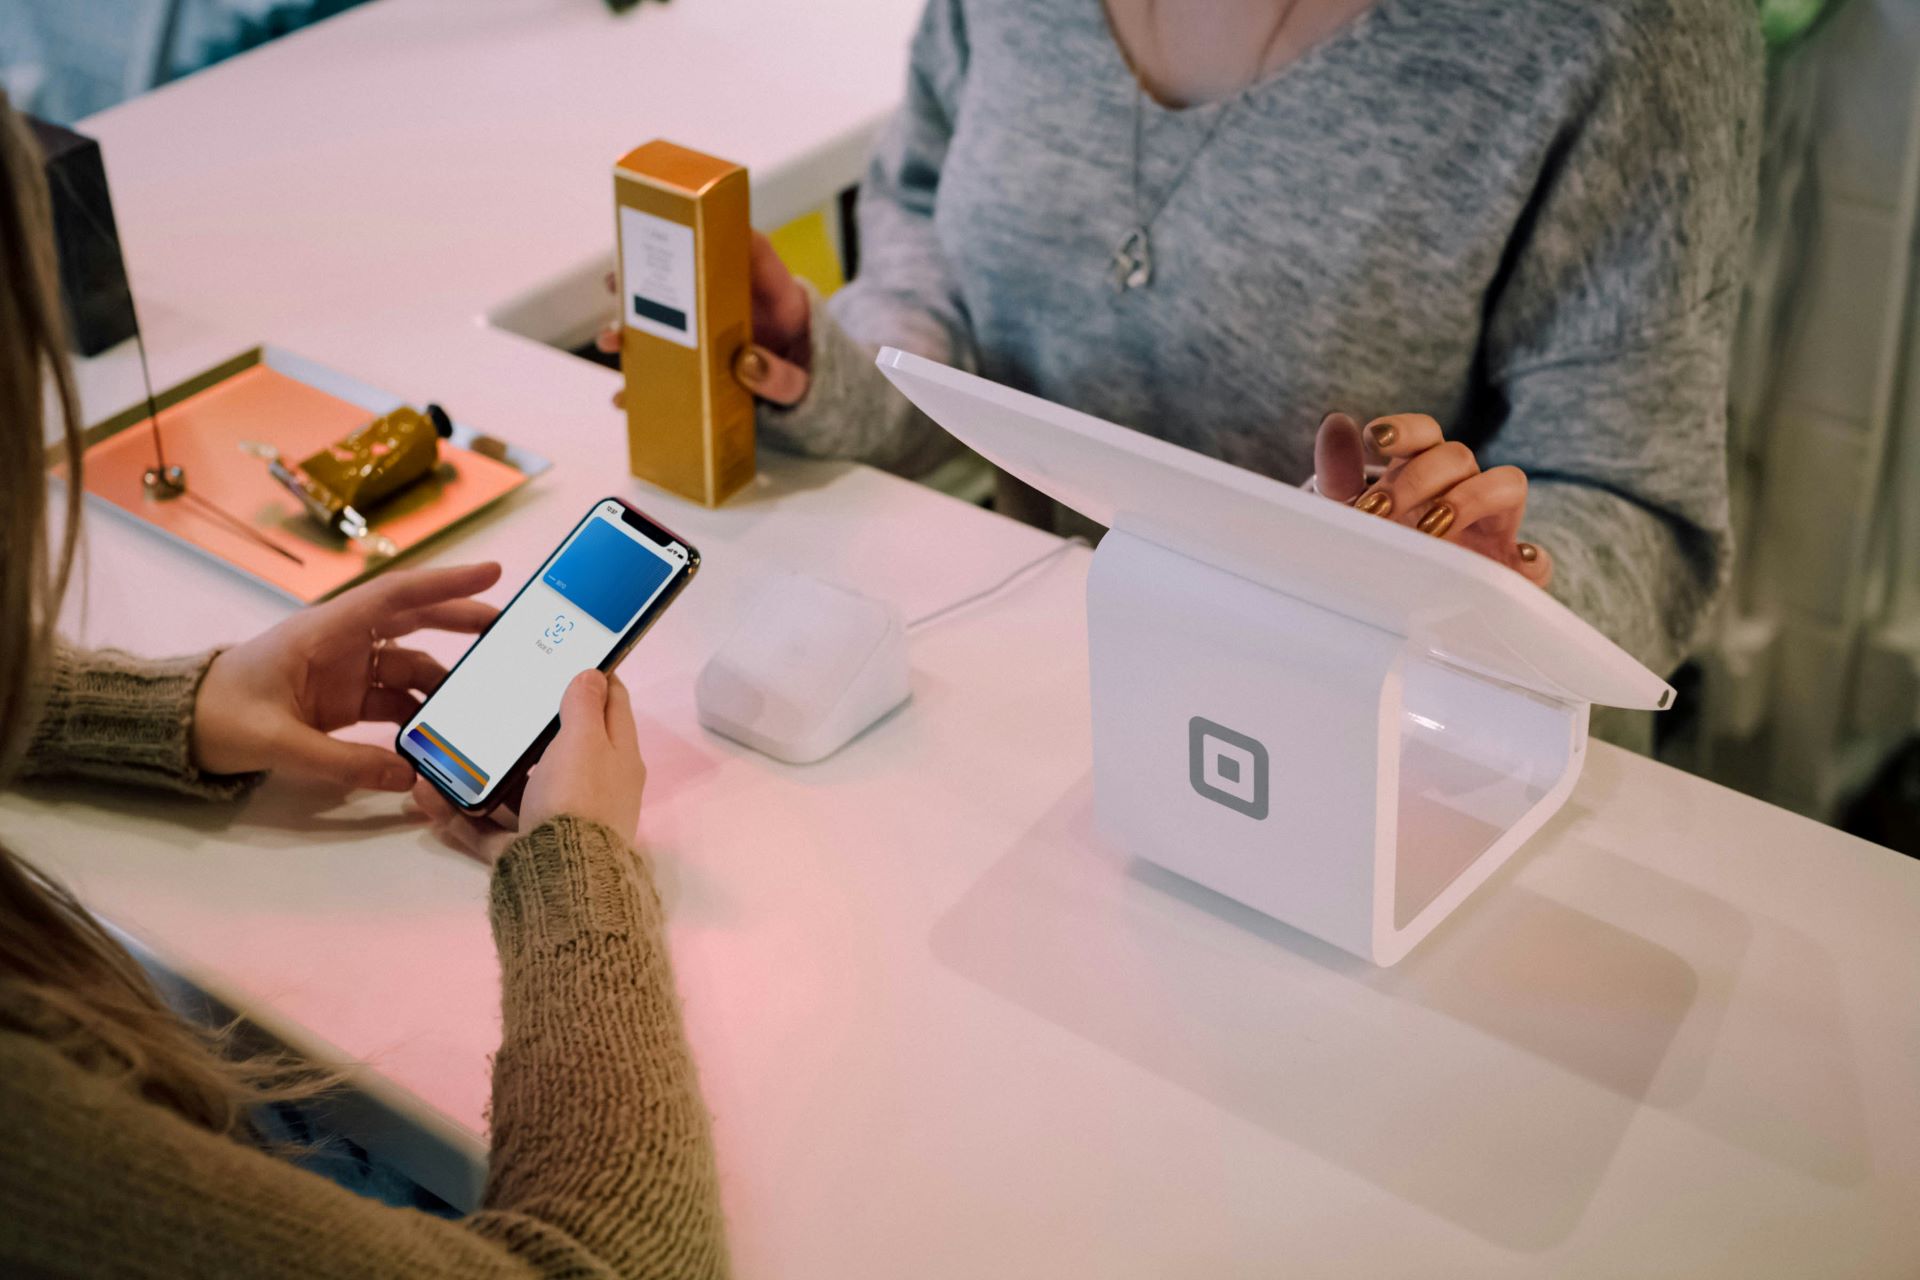 An iPhone with Apple Pay open tries to pay at an NFC payment terminal